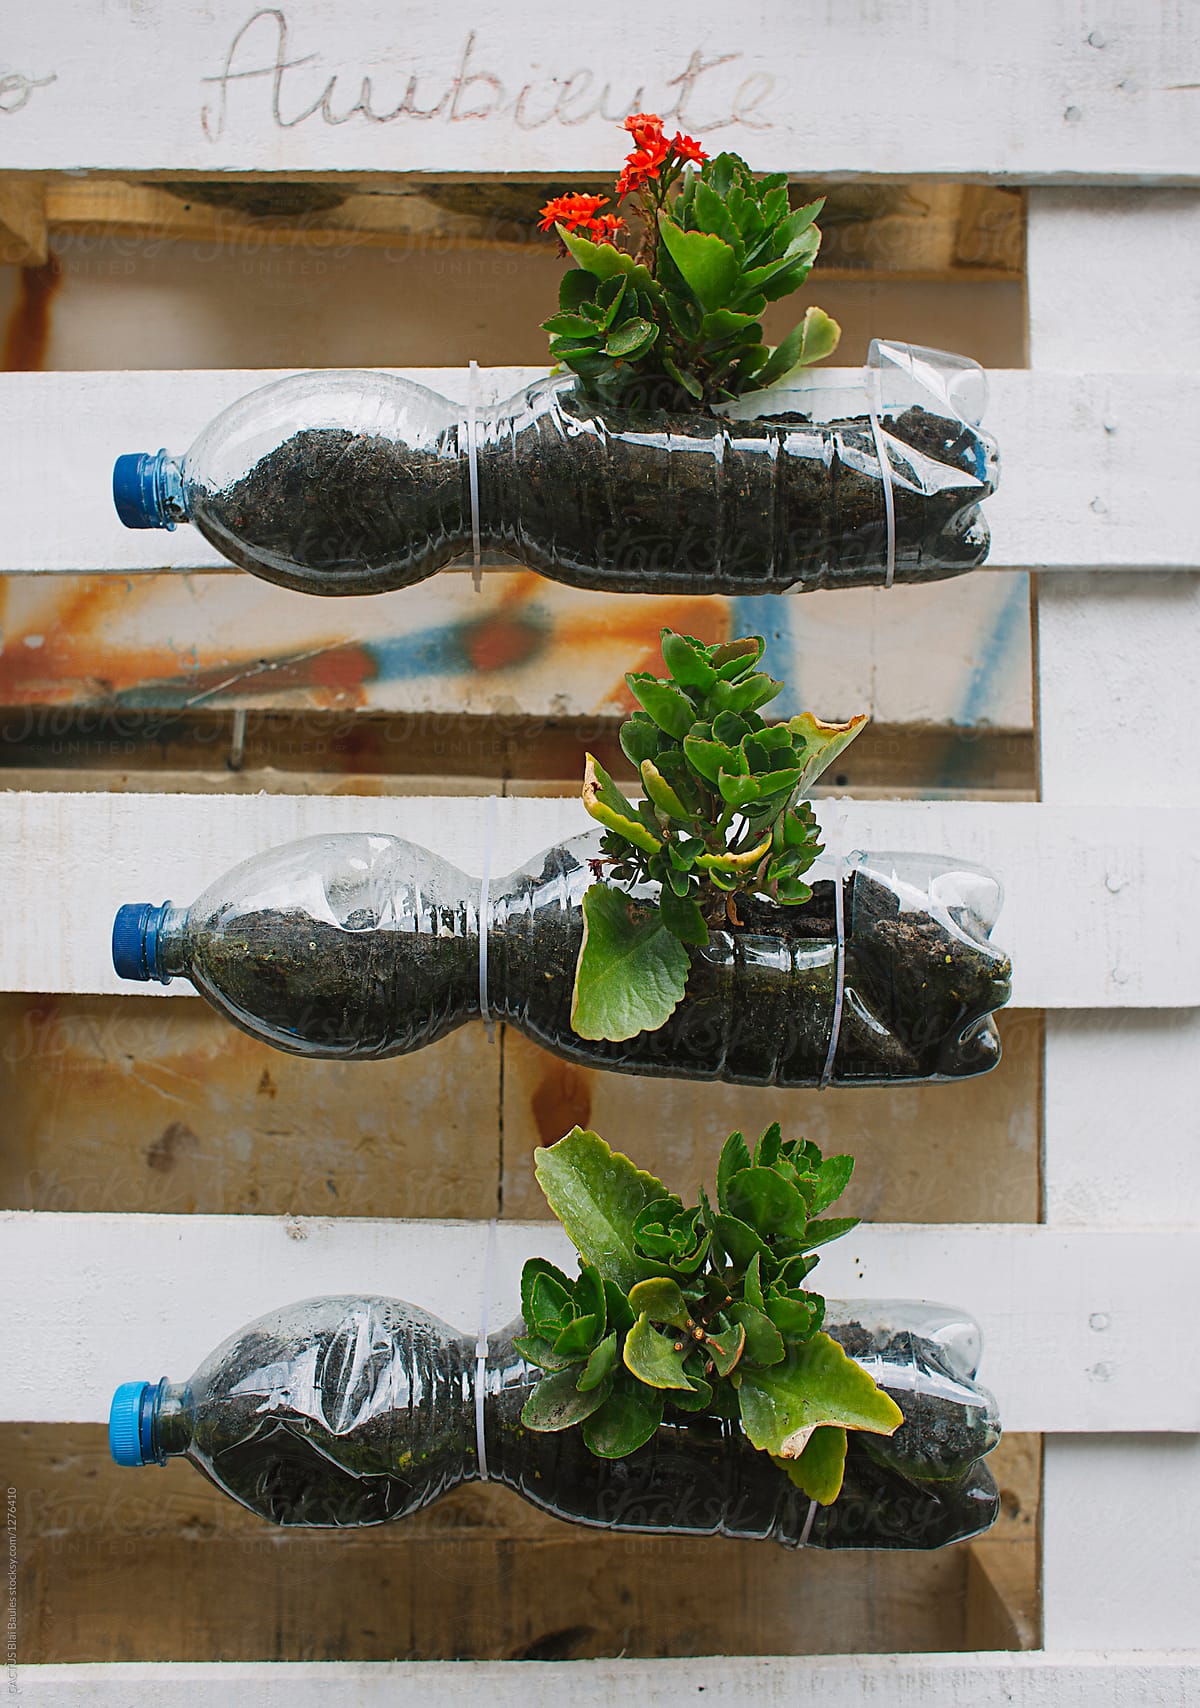 Recycled bottles and plants